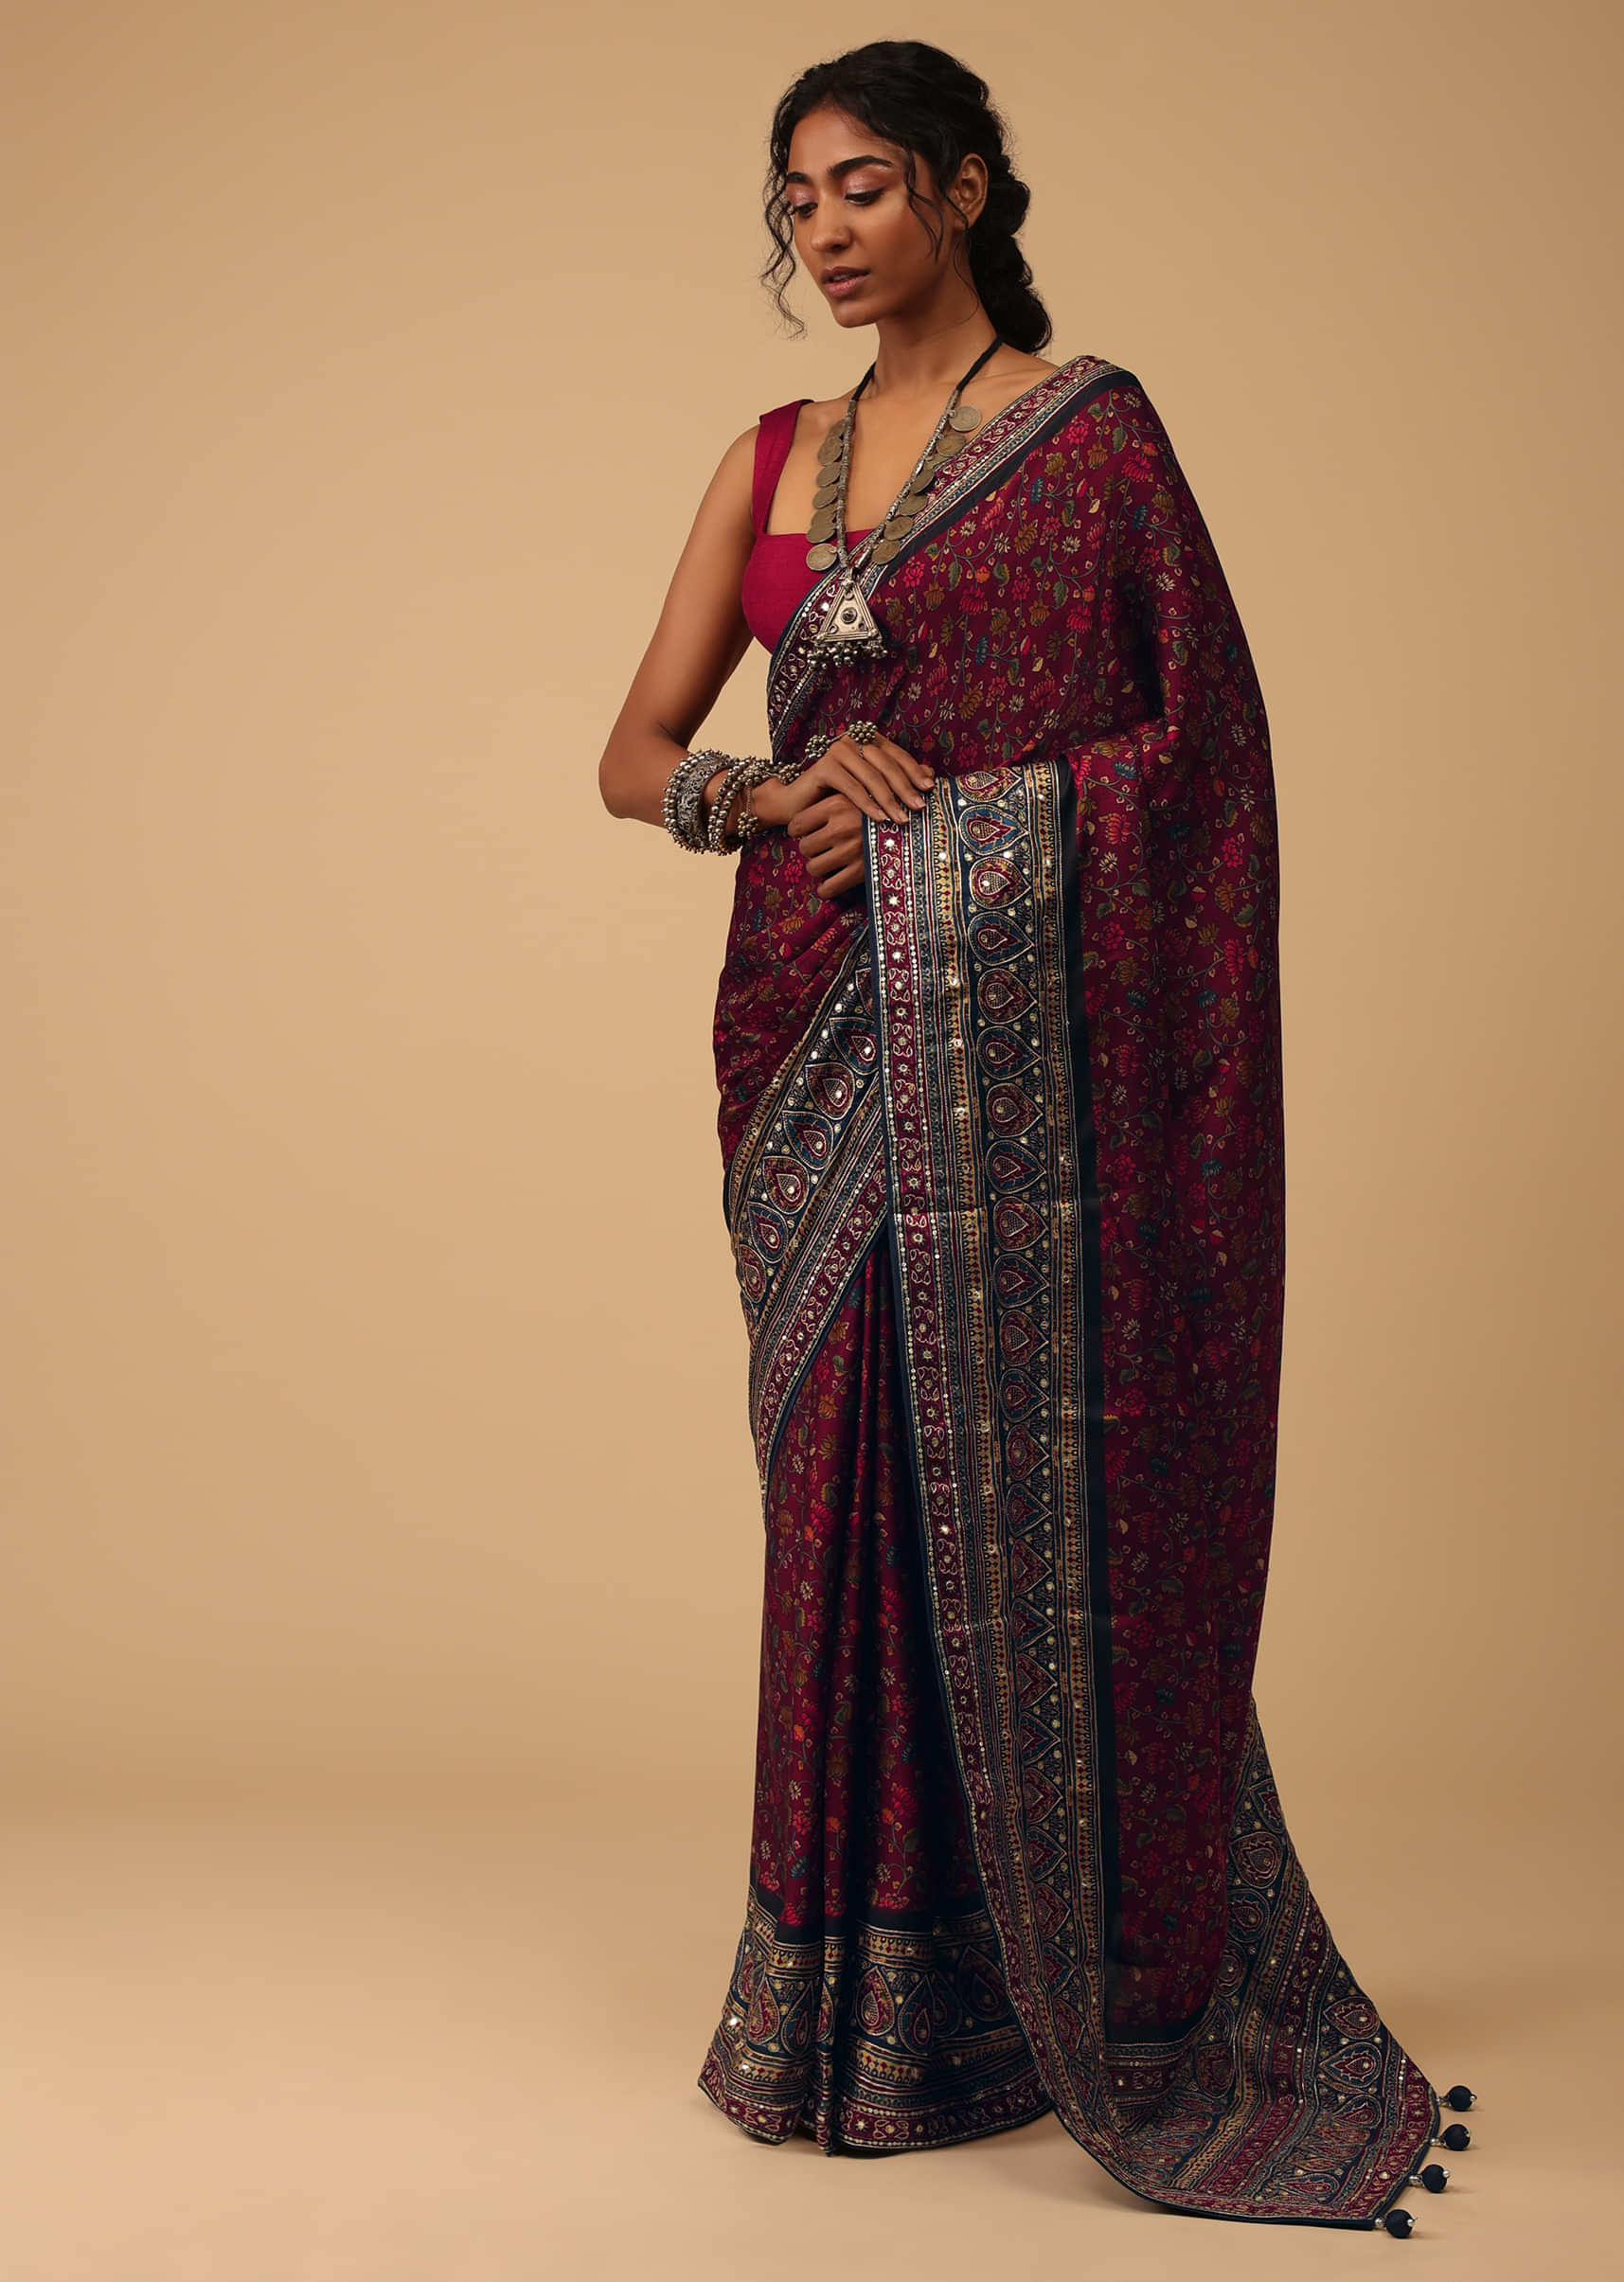 Cherry Red Muslin Saree With Ajrakh Border And Floral Print